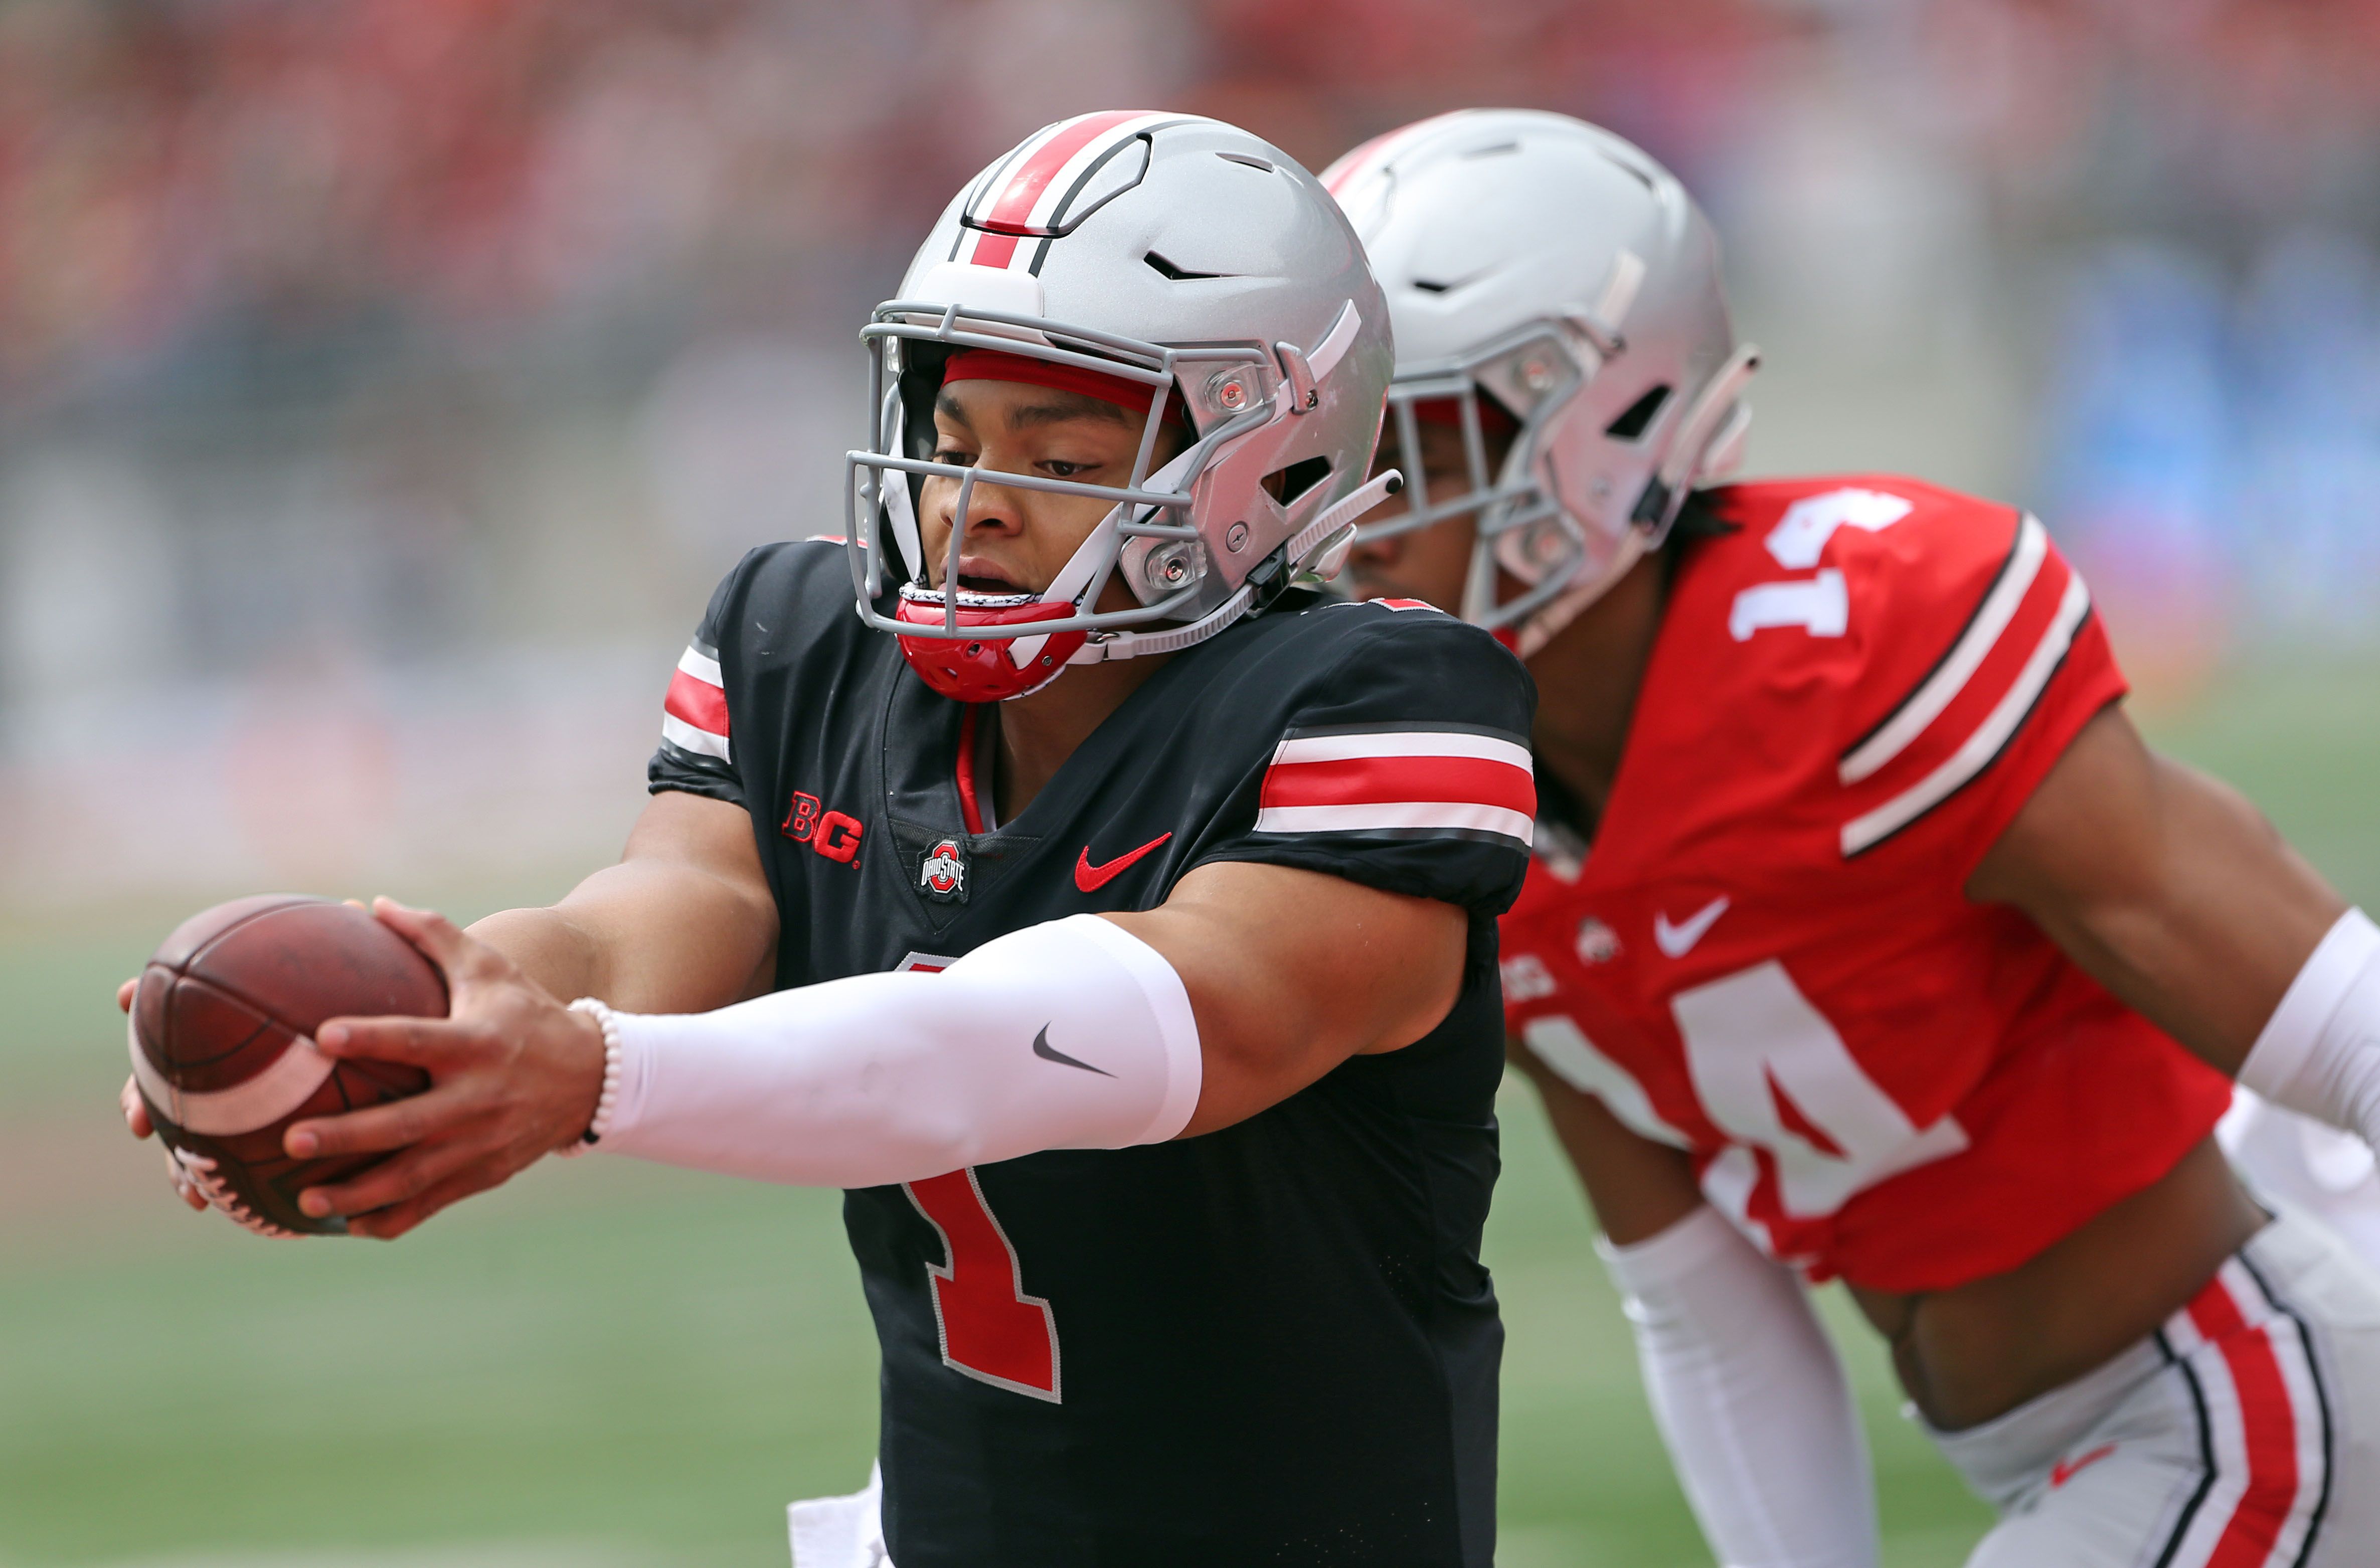 Ohio State quarterback Justin Fields' 40-yard dash time would've been best  in the NFL Combine for QBs 